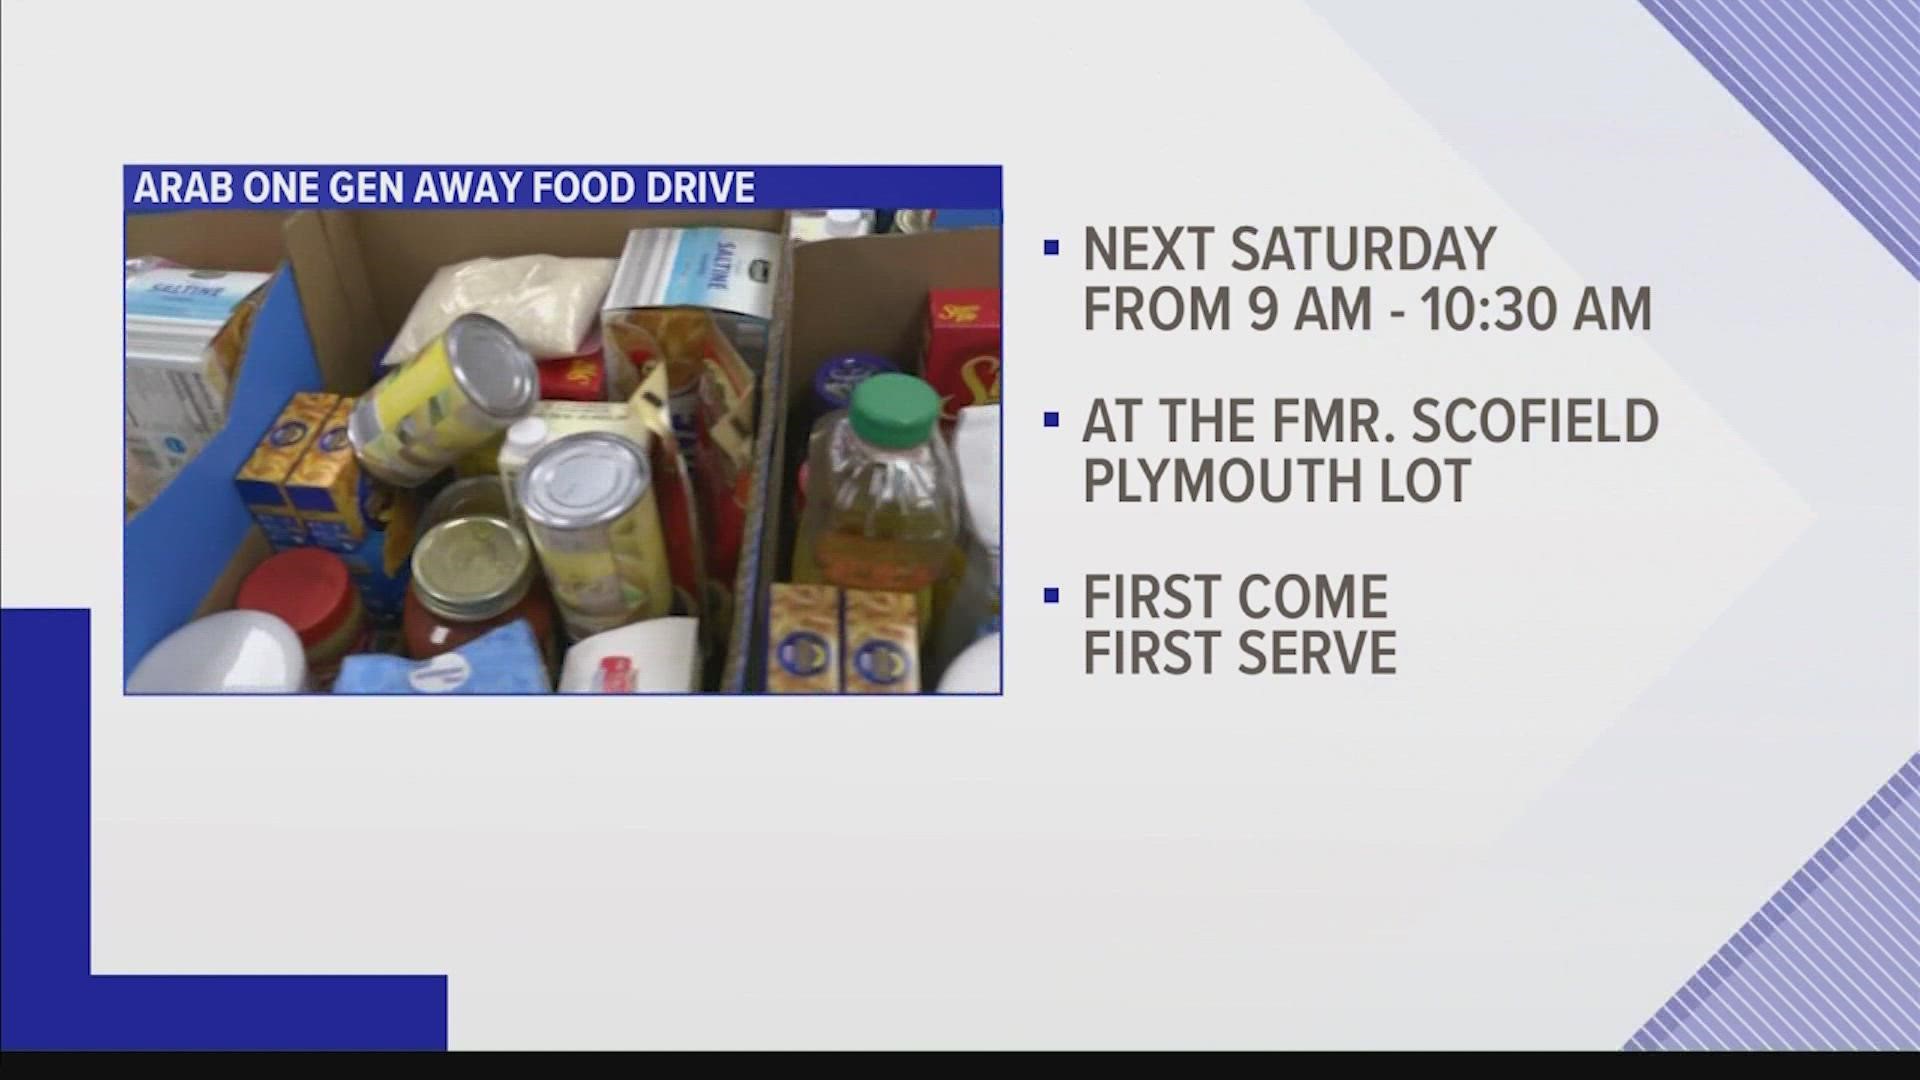 Groceries lately aren't cheap and if you're in need of food, One Generation Away will host a food drive in Arab this Saturday.